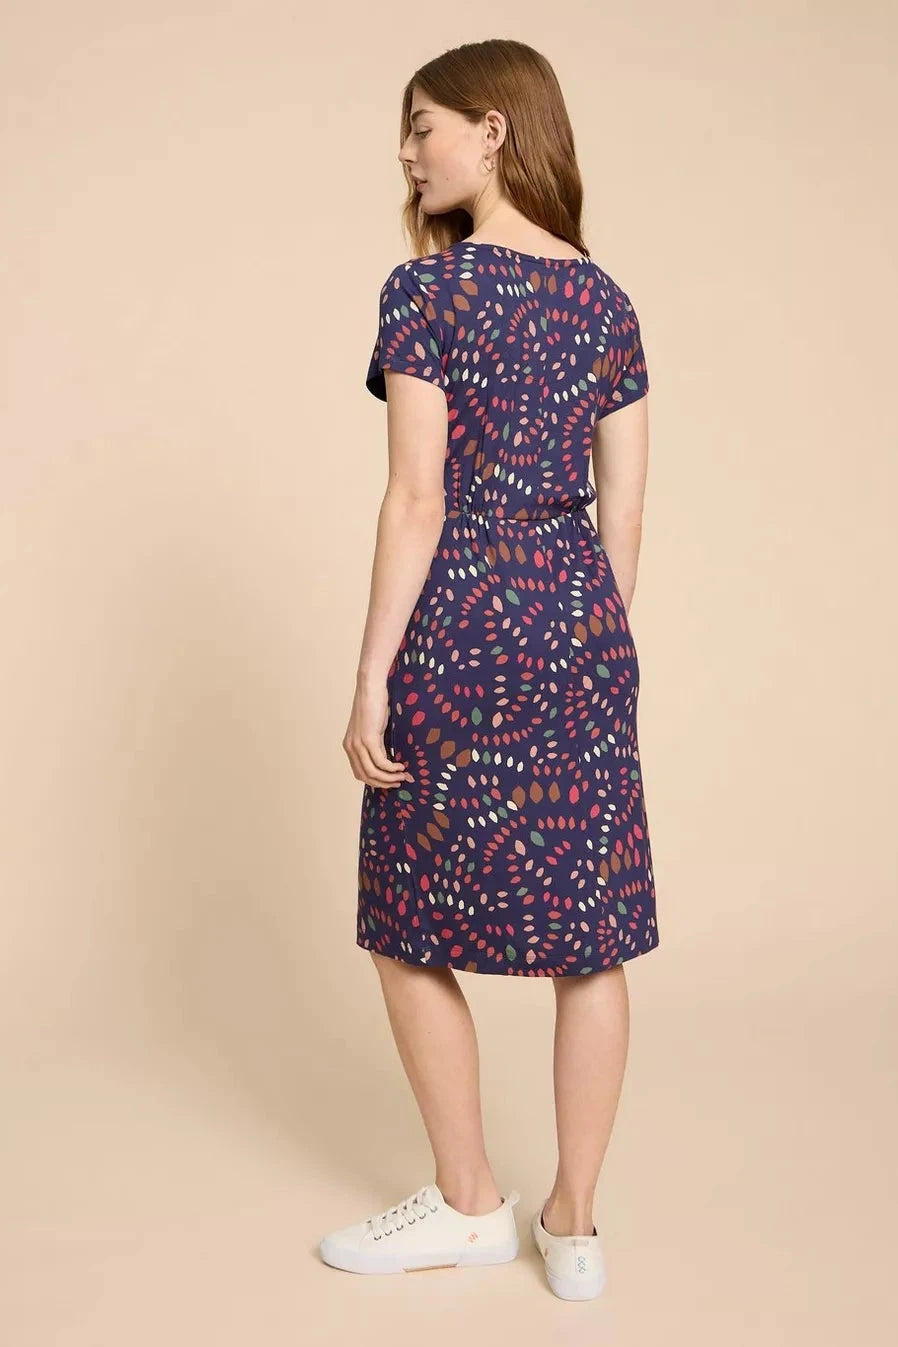 White Stuff Tallie Eco Vero Jersey Dress in Navy Print-Womens-Ohh! By Gum - Shop Sustainable